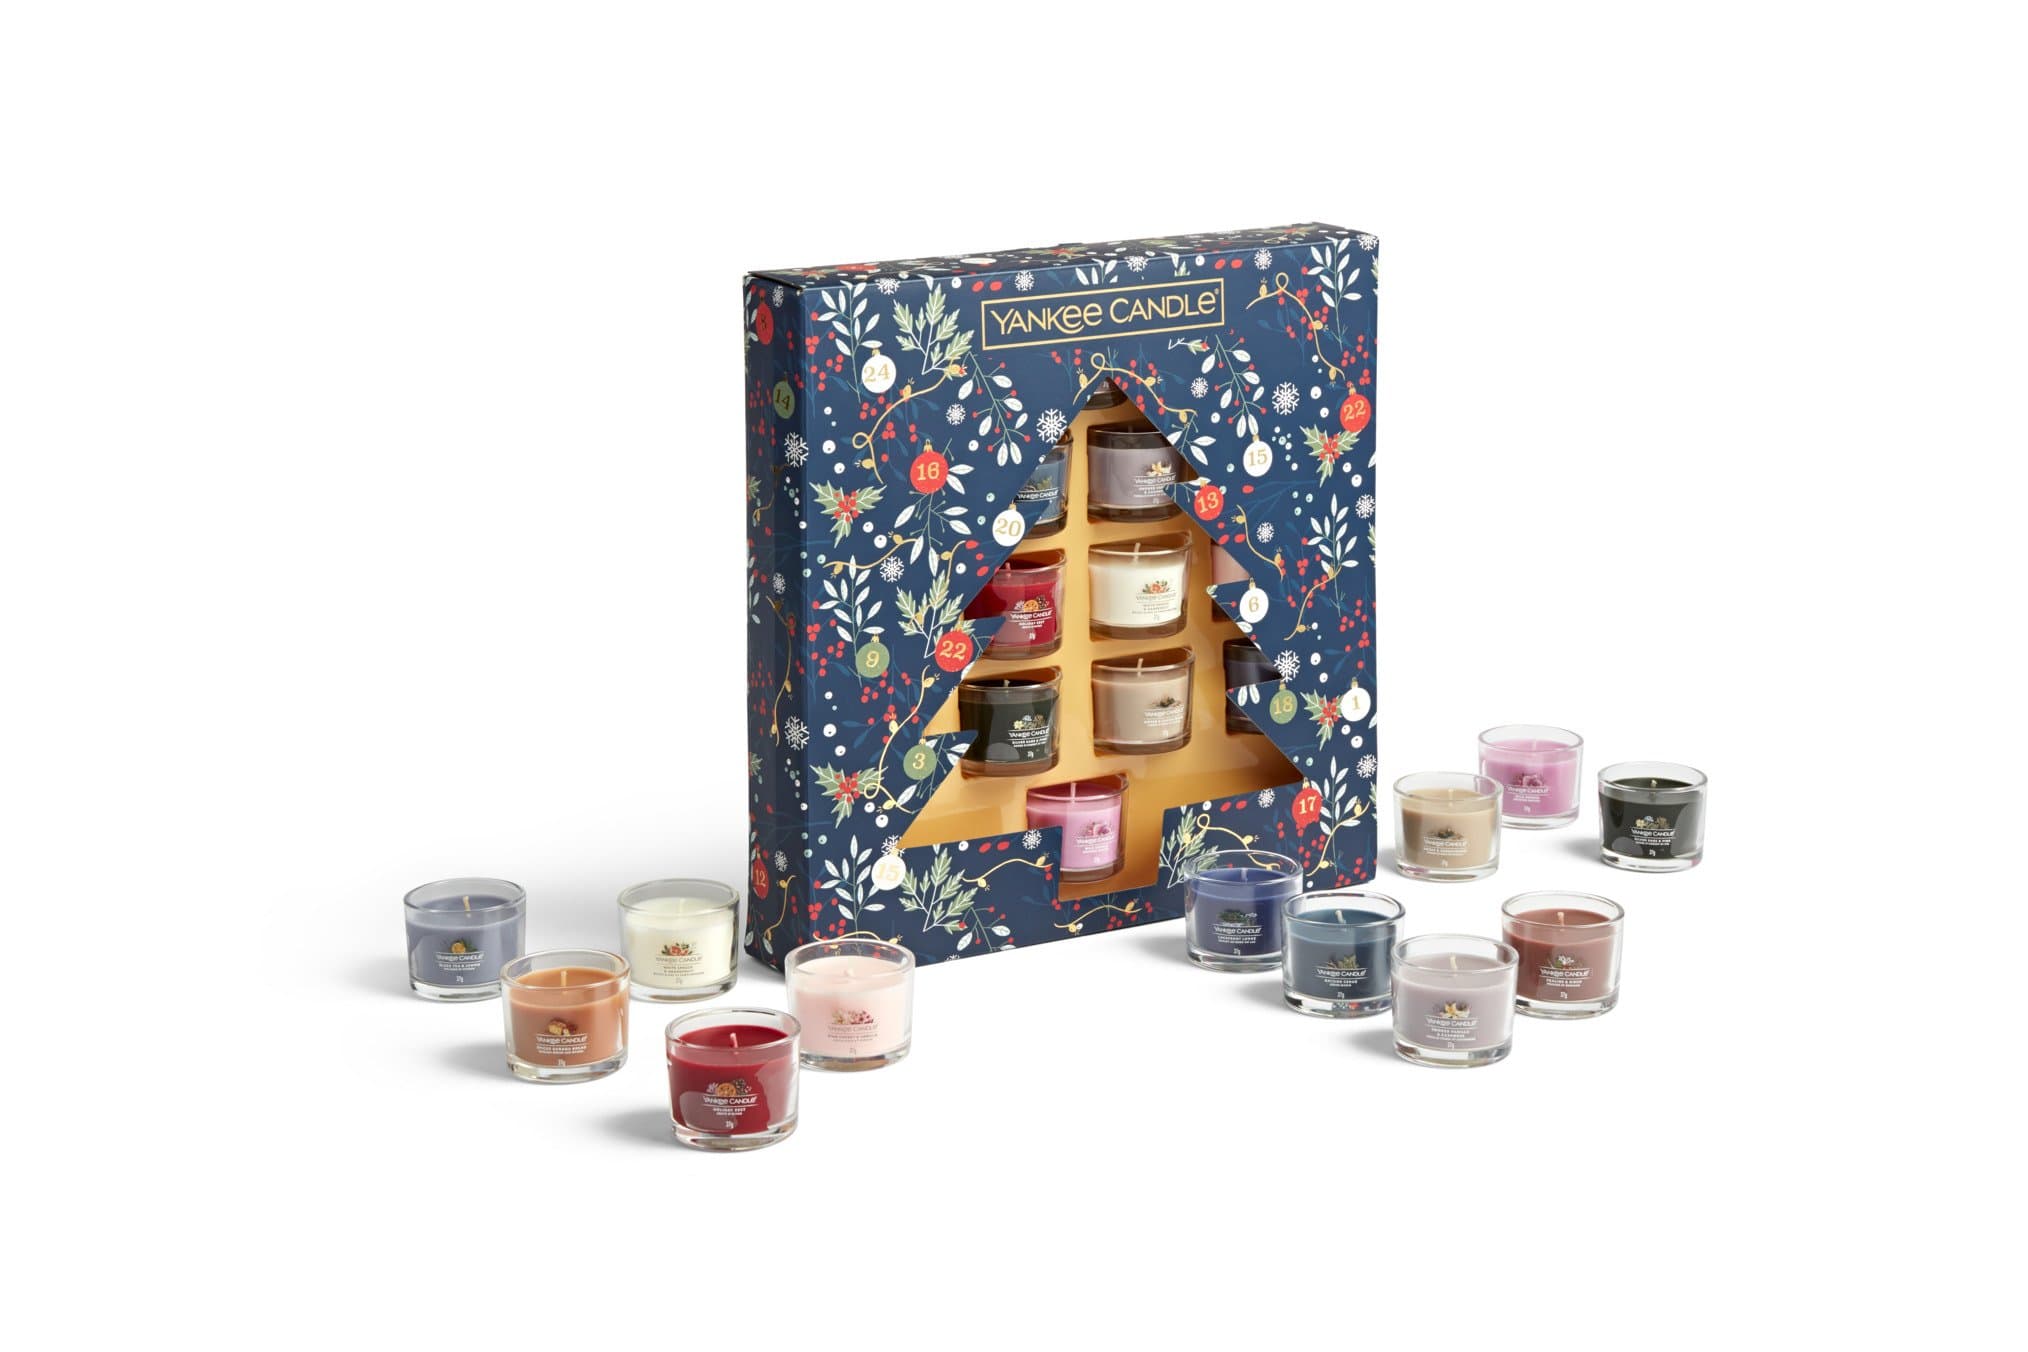 Yankee Candle Gift Set Yankee Candle Countdown to Christmas Gift Tree - 12 Signature Filled Votives